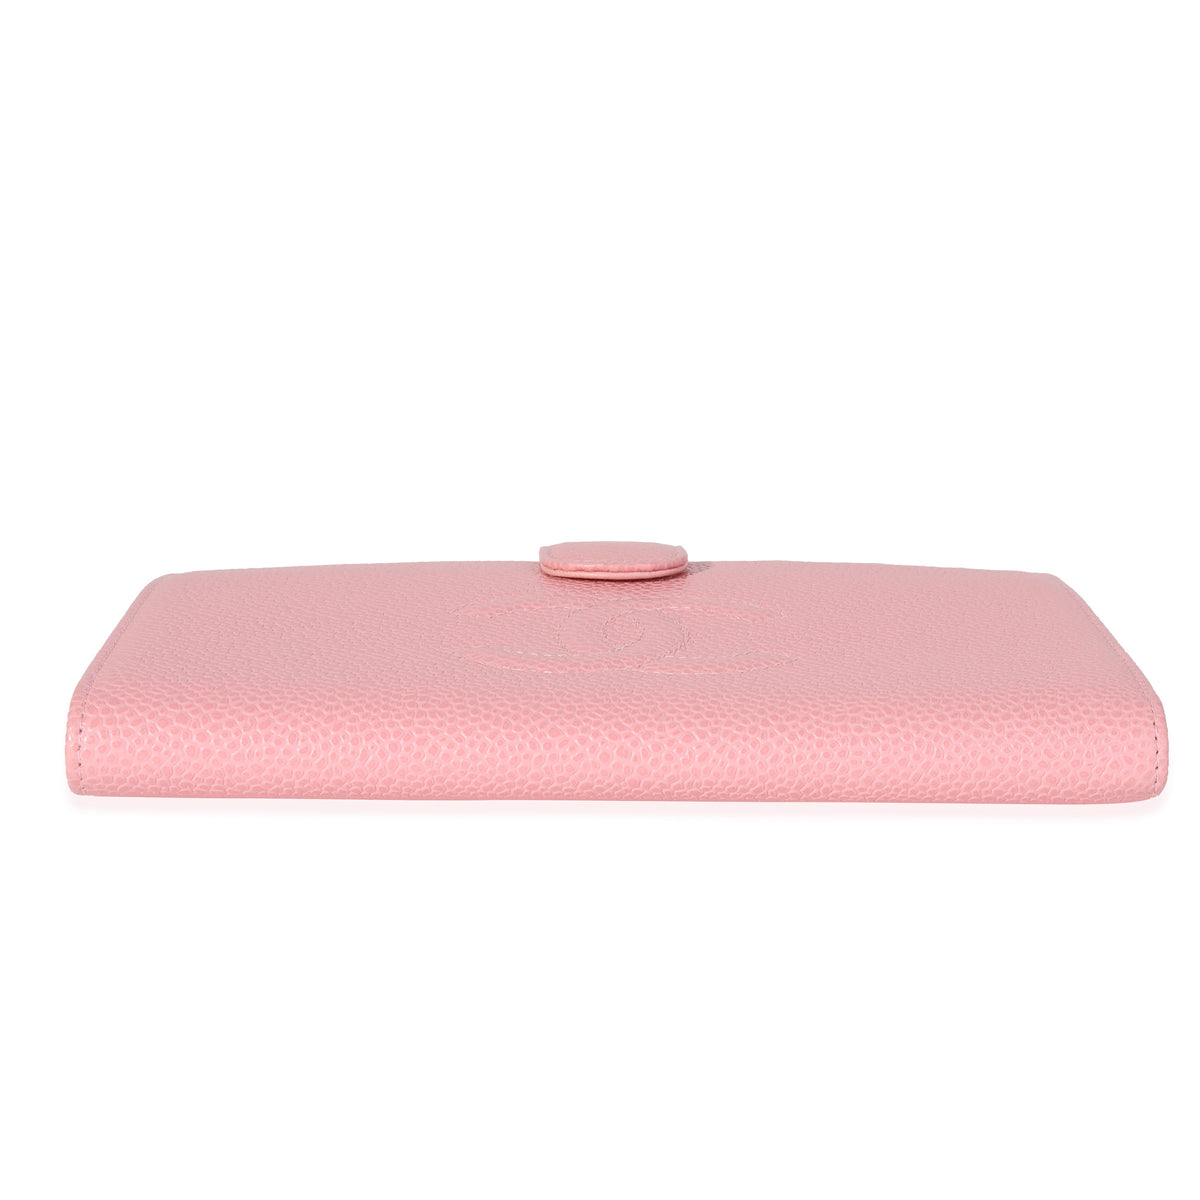 Chanel Pink Caviar Timeless Wallet